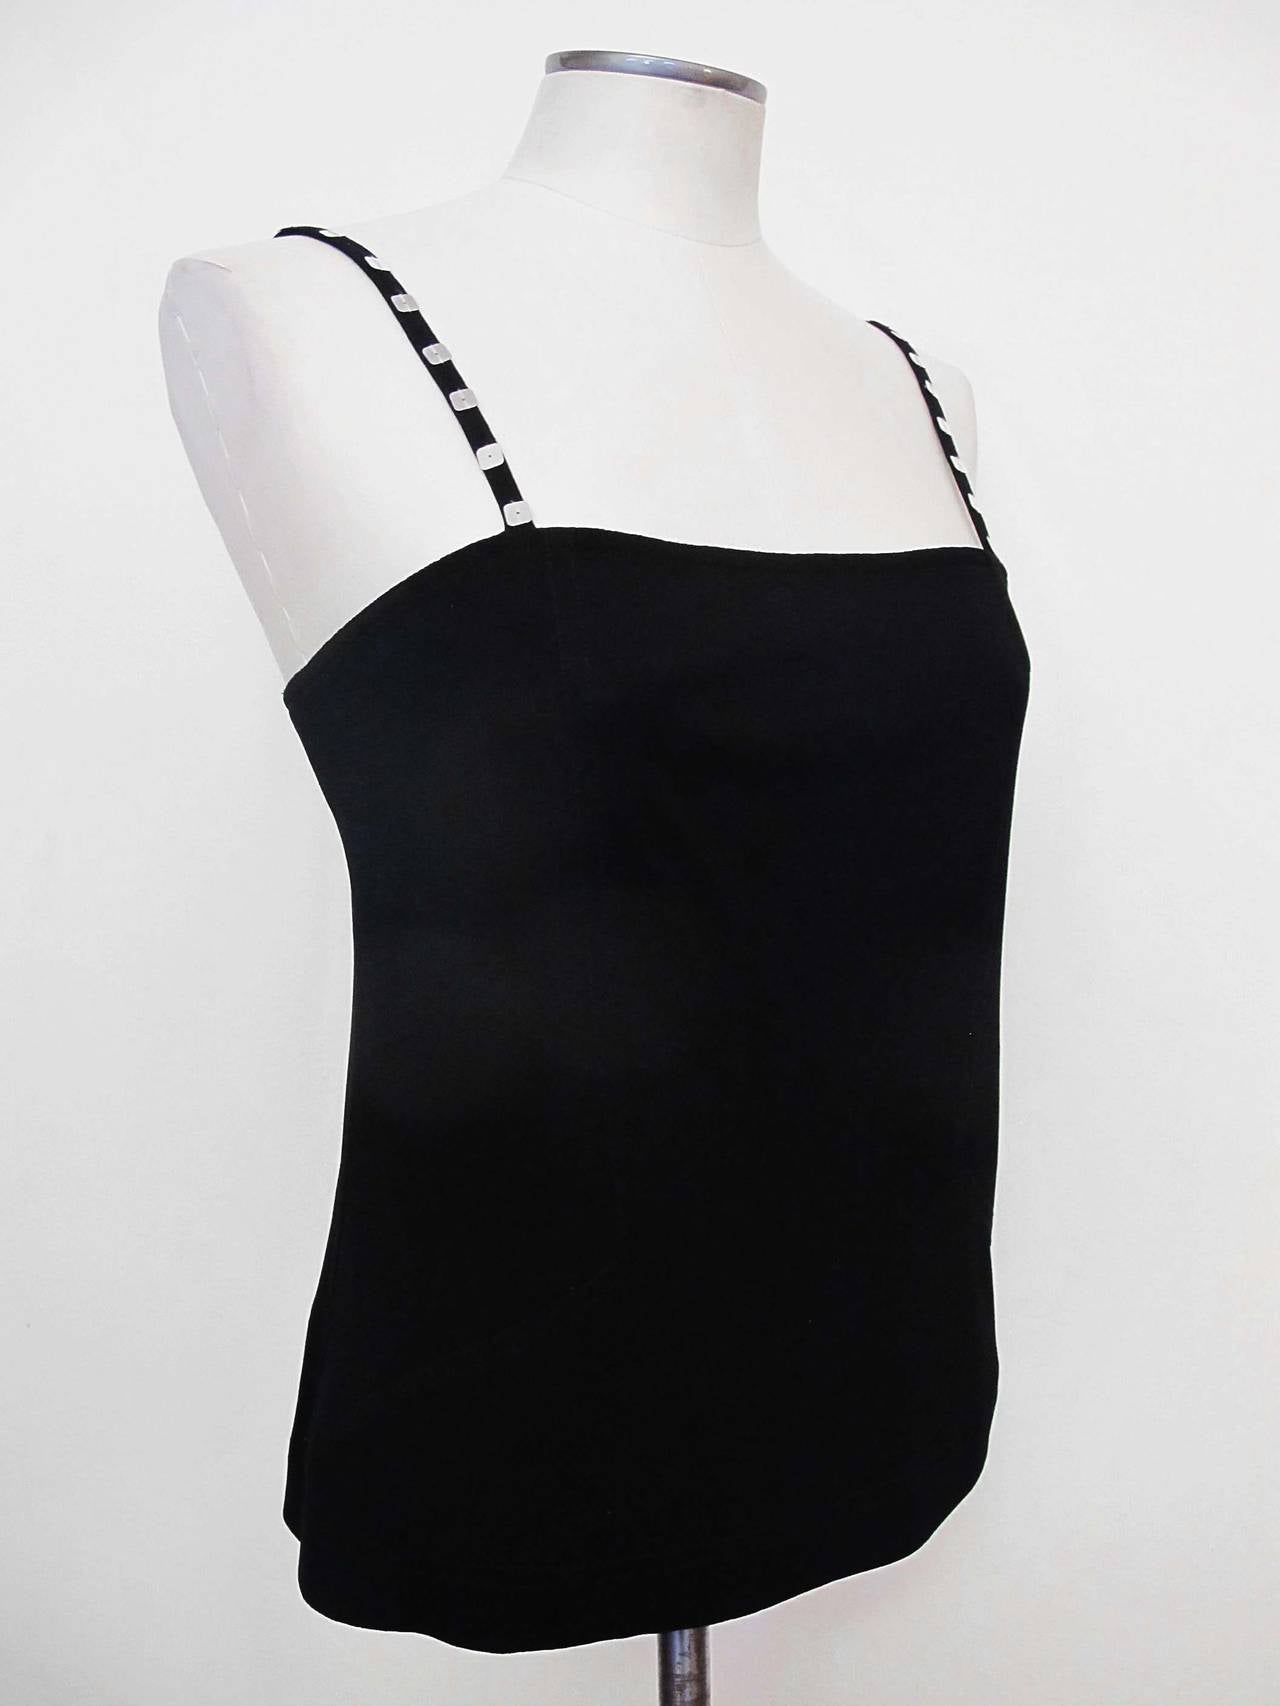 Black tank top with square silver sequins on straps. This piece is from the 1980's and was donated to Helpers by San Francisco's chic store: 
Wilkes Bashford